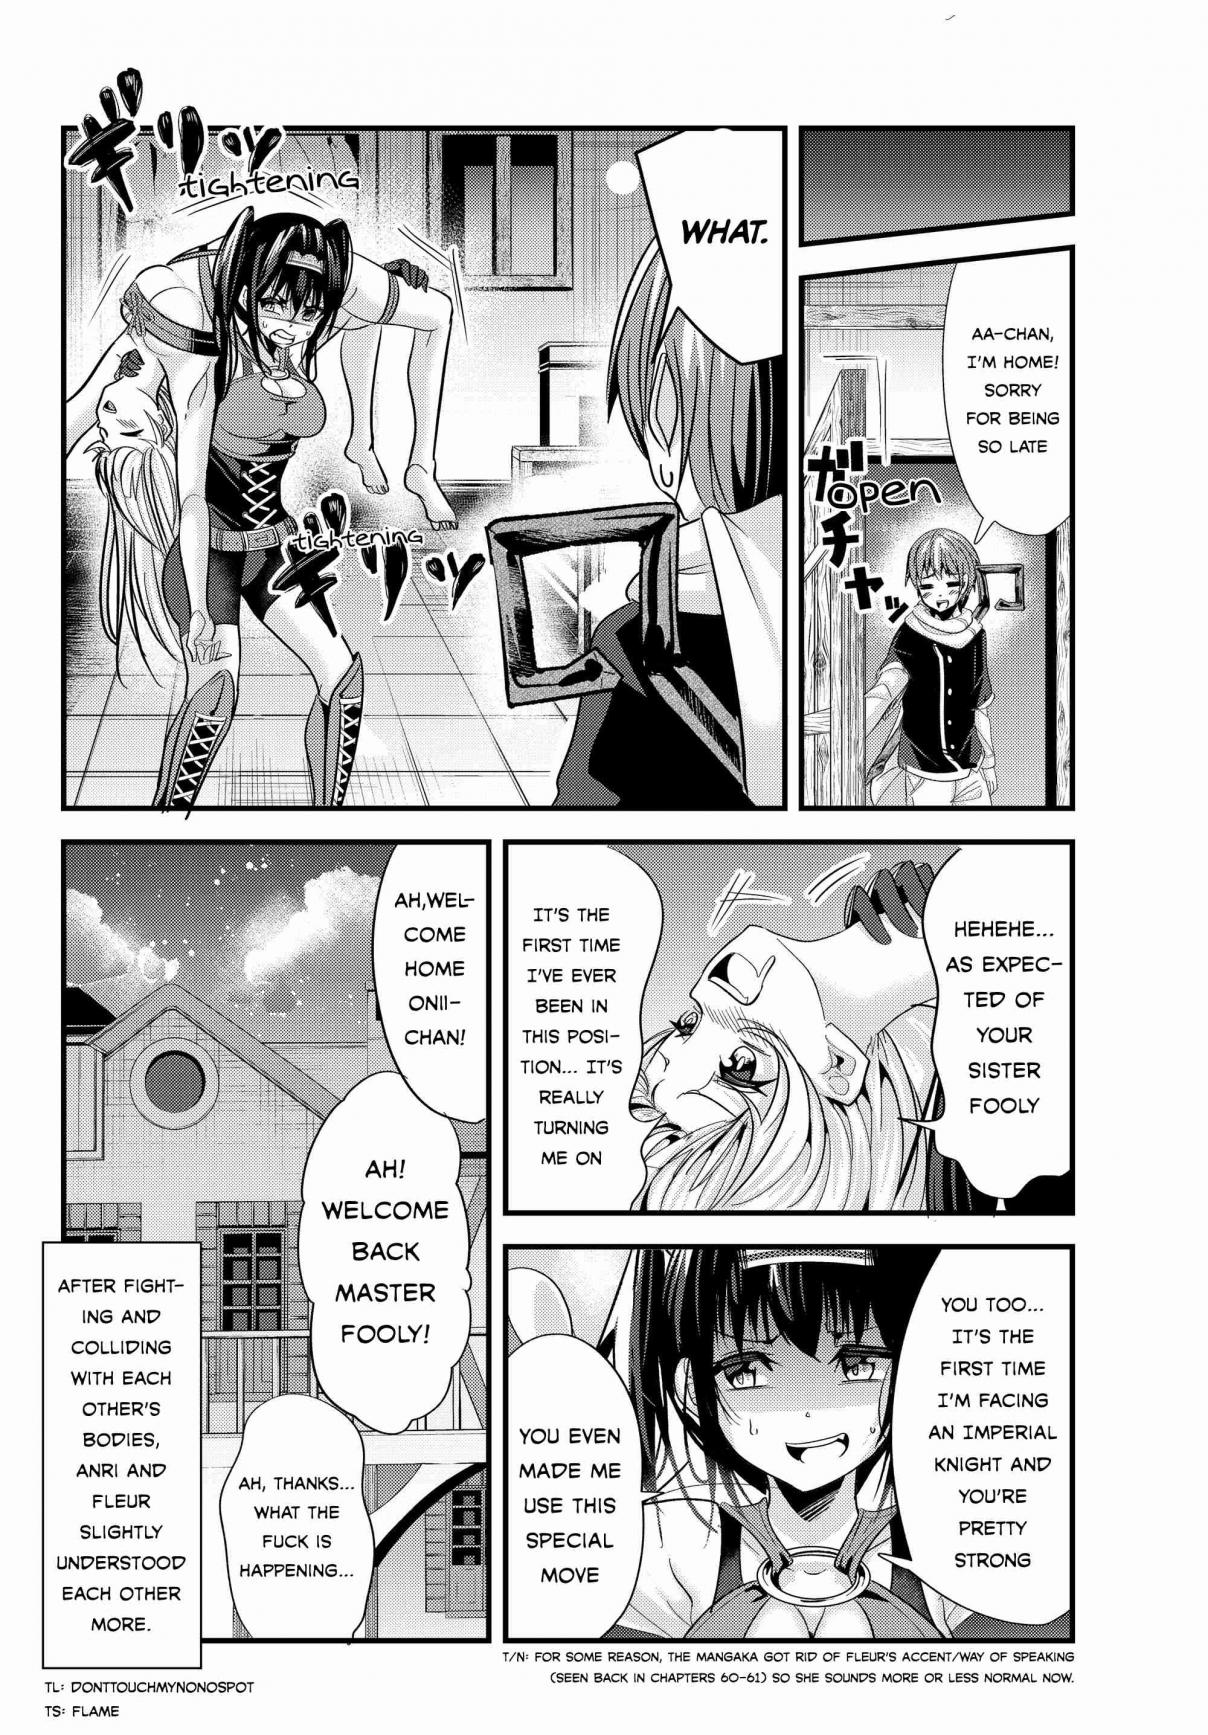 A Story About Treating a Female Knight, Who Has Never Been Treated as a Woman, as a Woman Ch. 70 The Imperial Knight and Anri